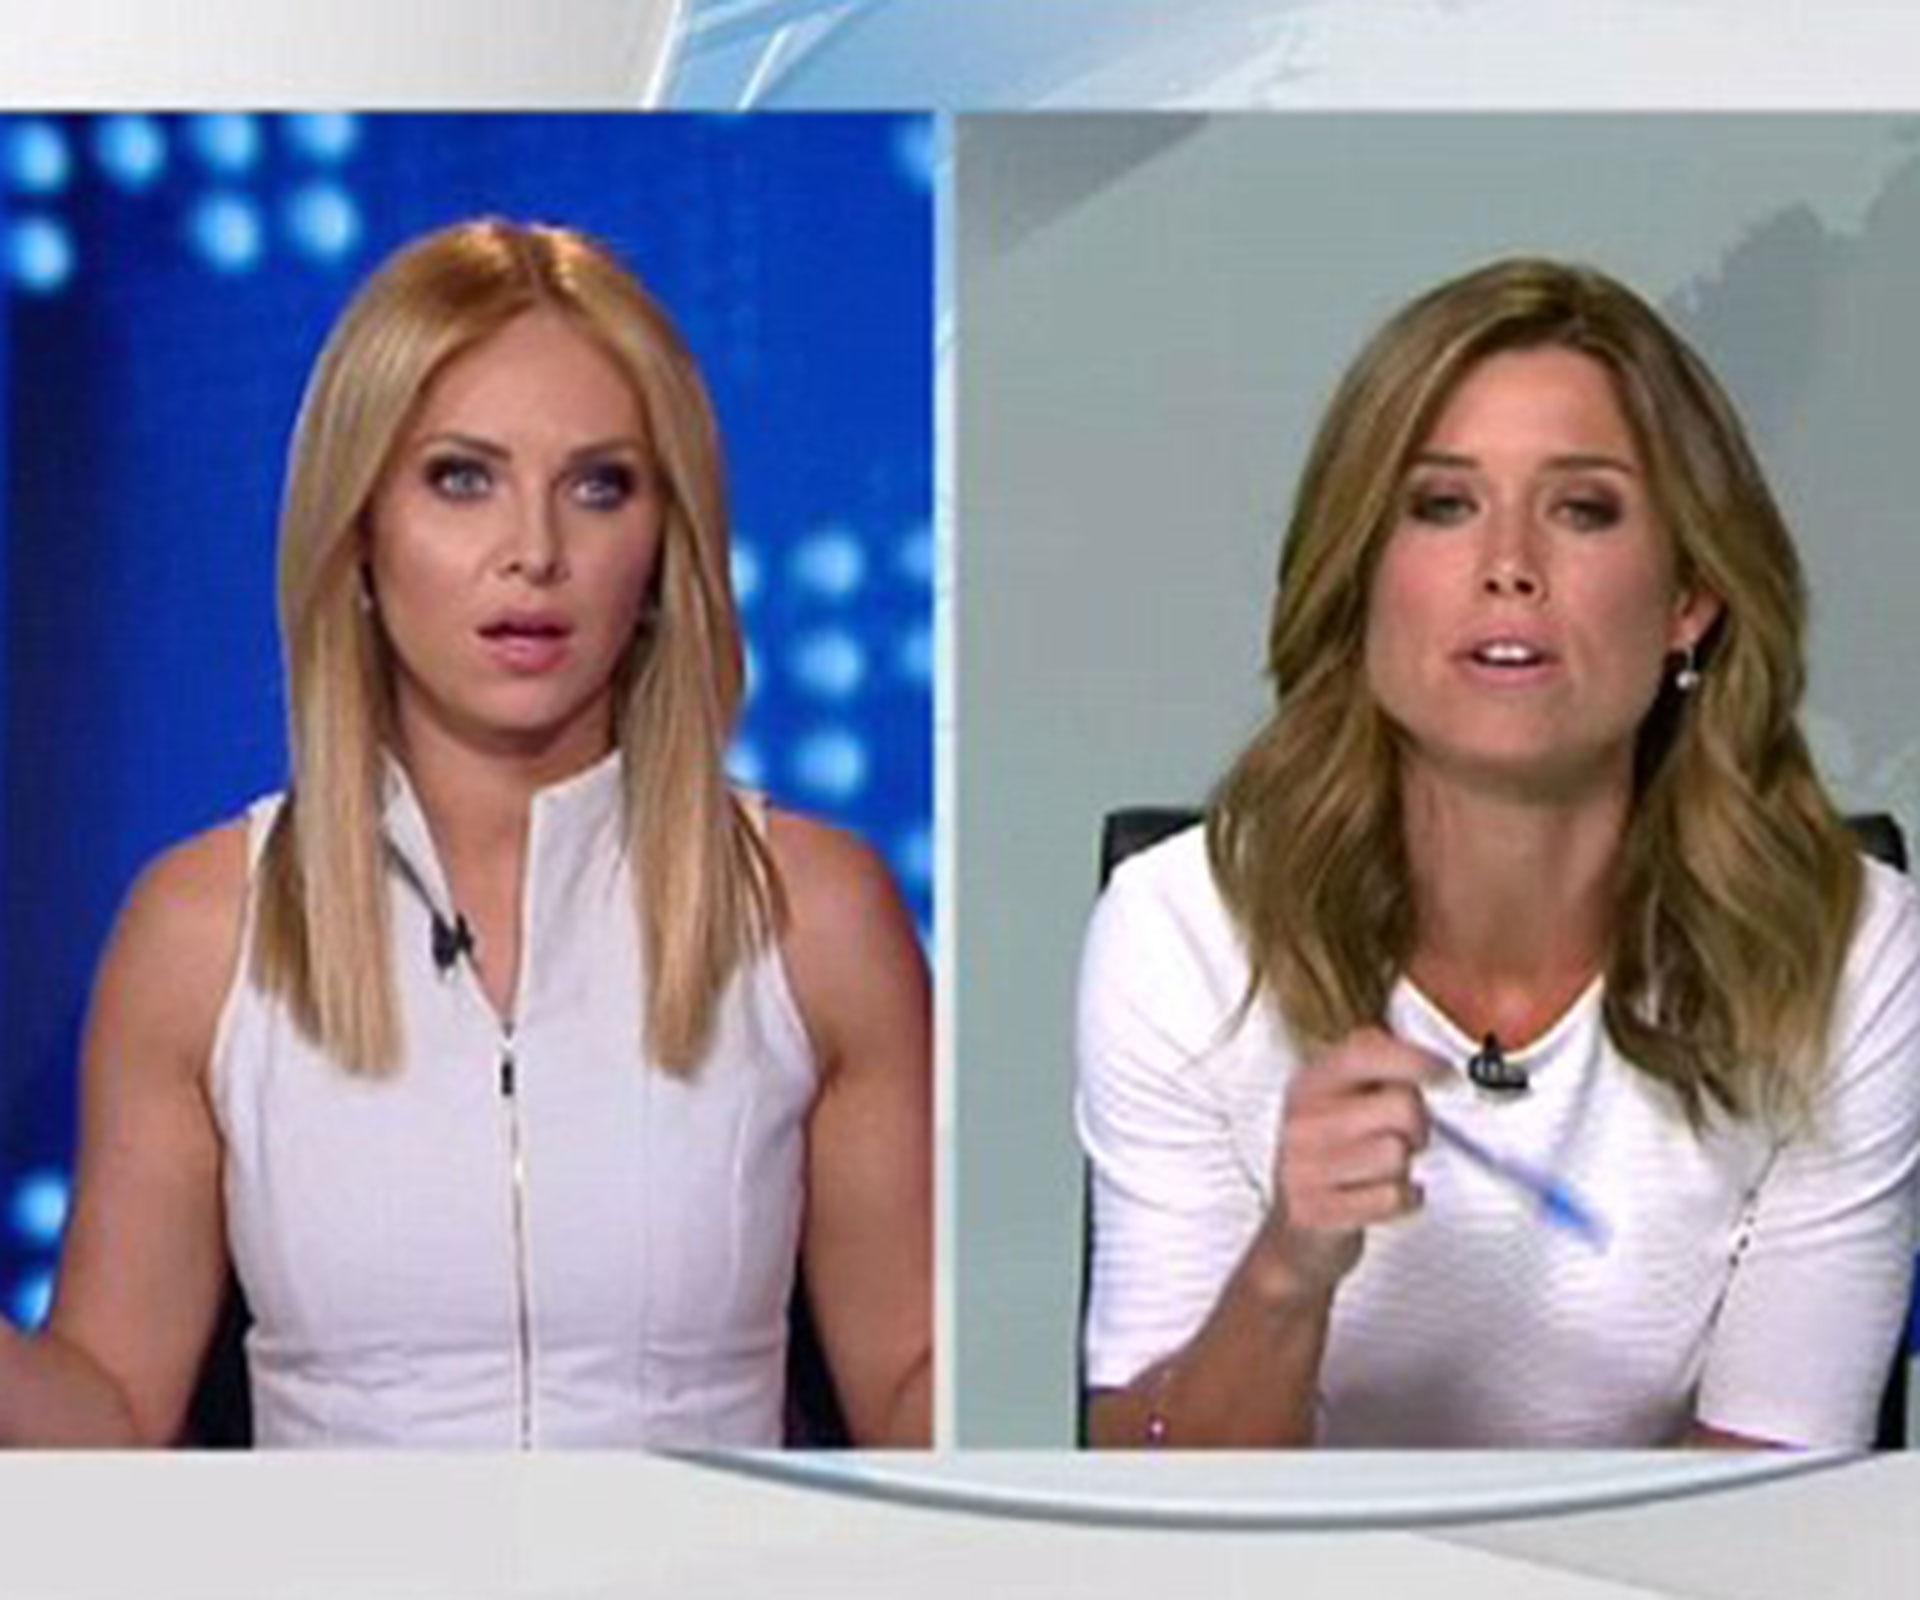 WATCH: News presenter’s tantrum over matching outfits